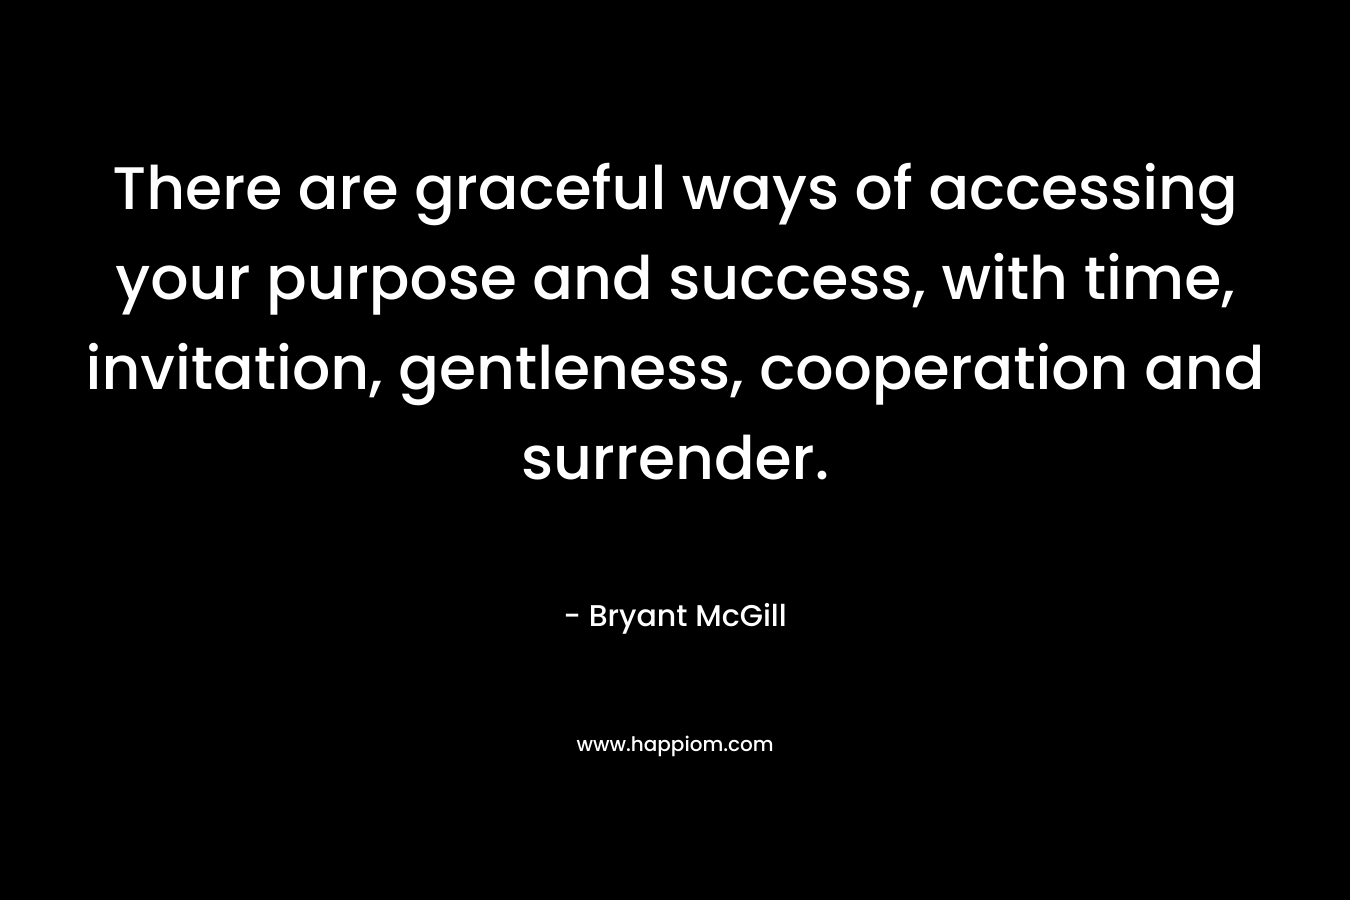 There are graceful ways of accessing your purpose and success, with time, invitation, gentleness, cooperation and surrender. – Bryant McGill